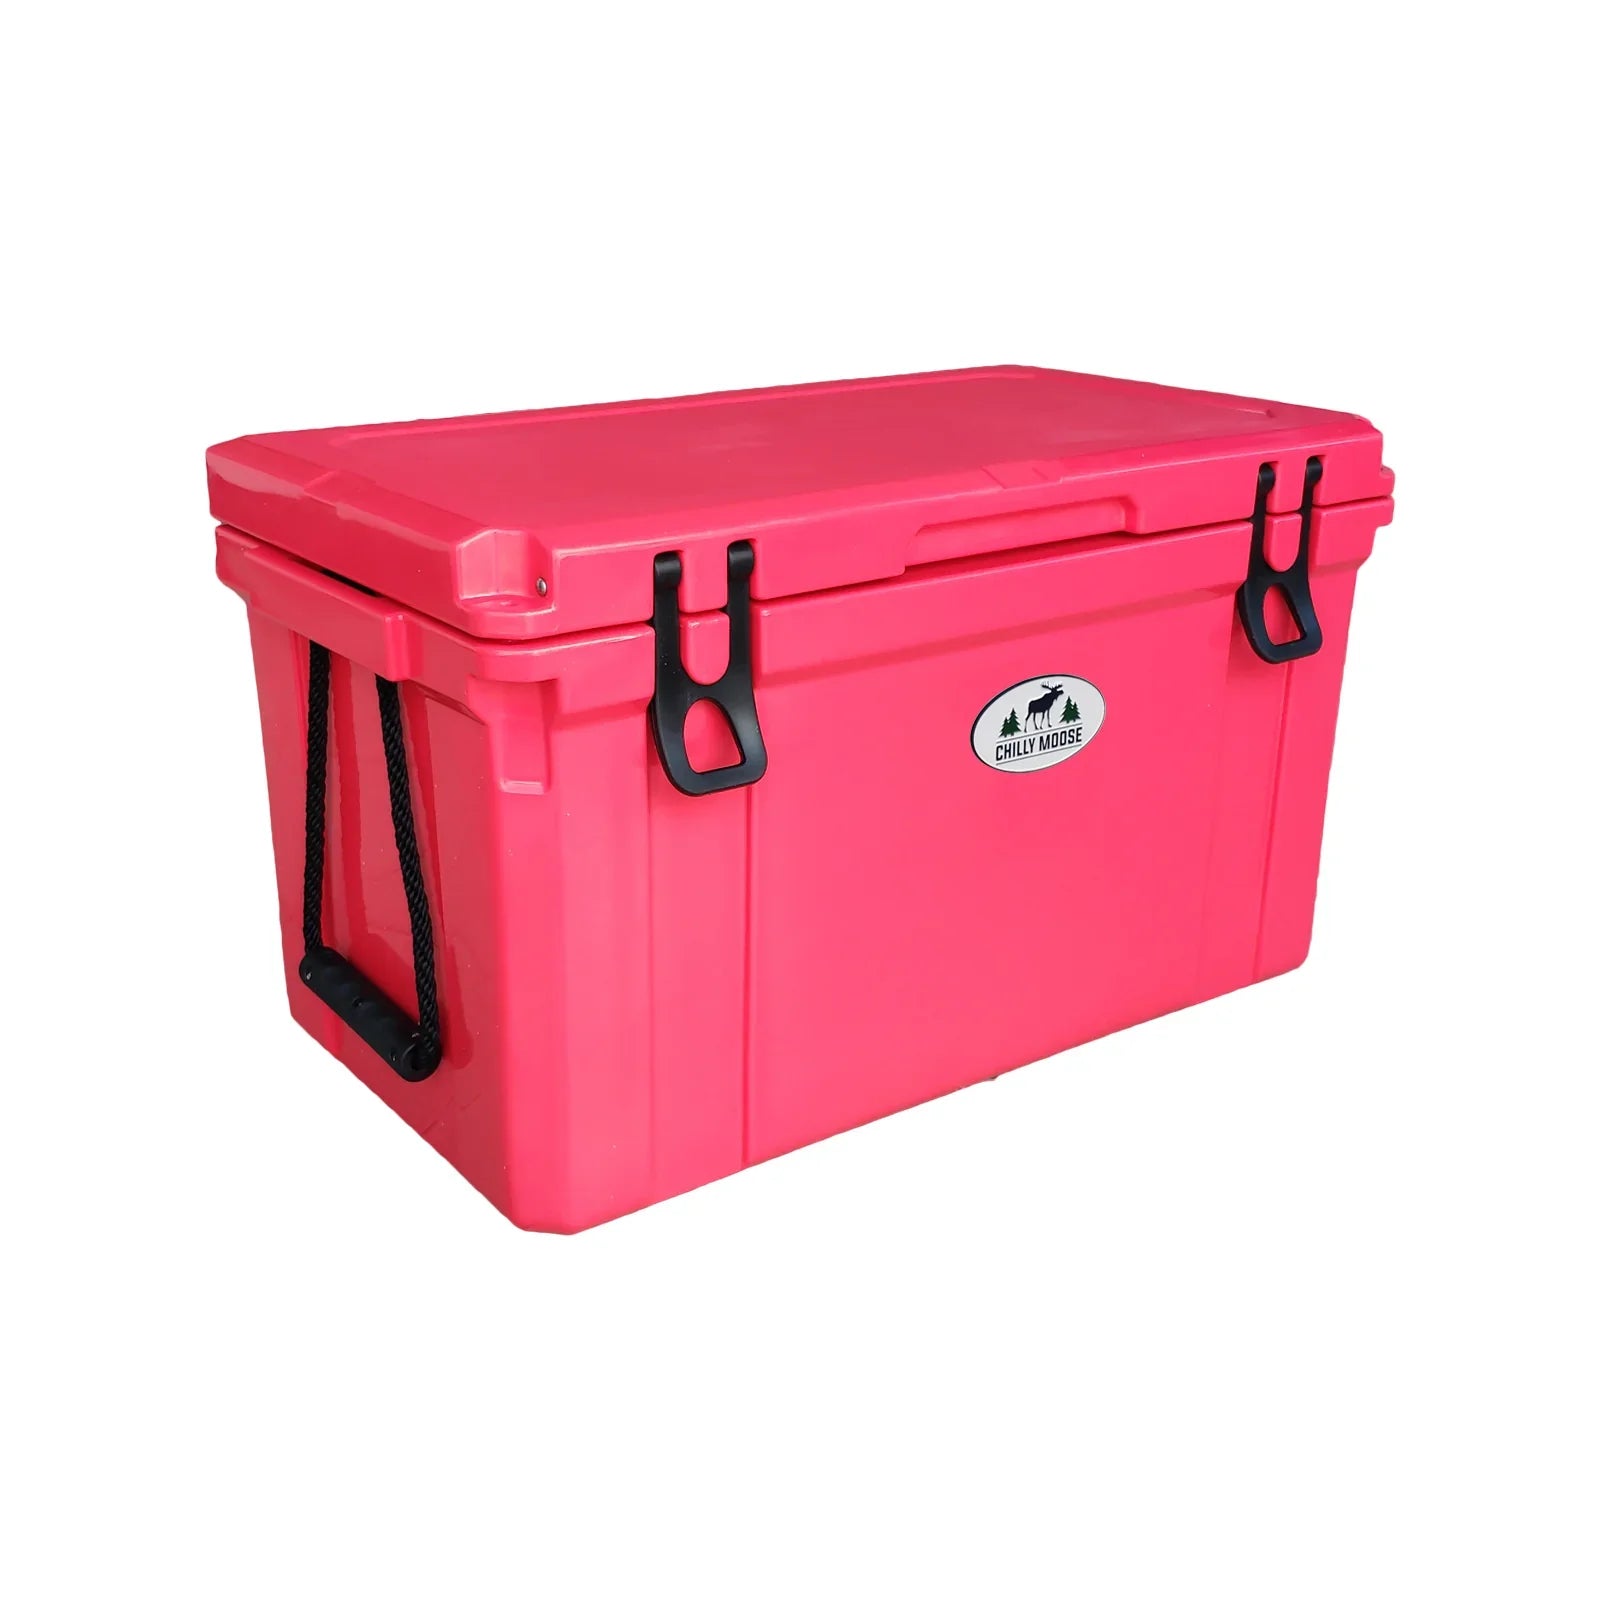 55L Chilly Moose Ice Box Cooler Canoe Red